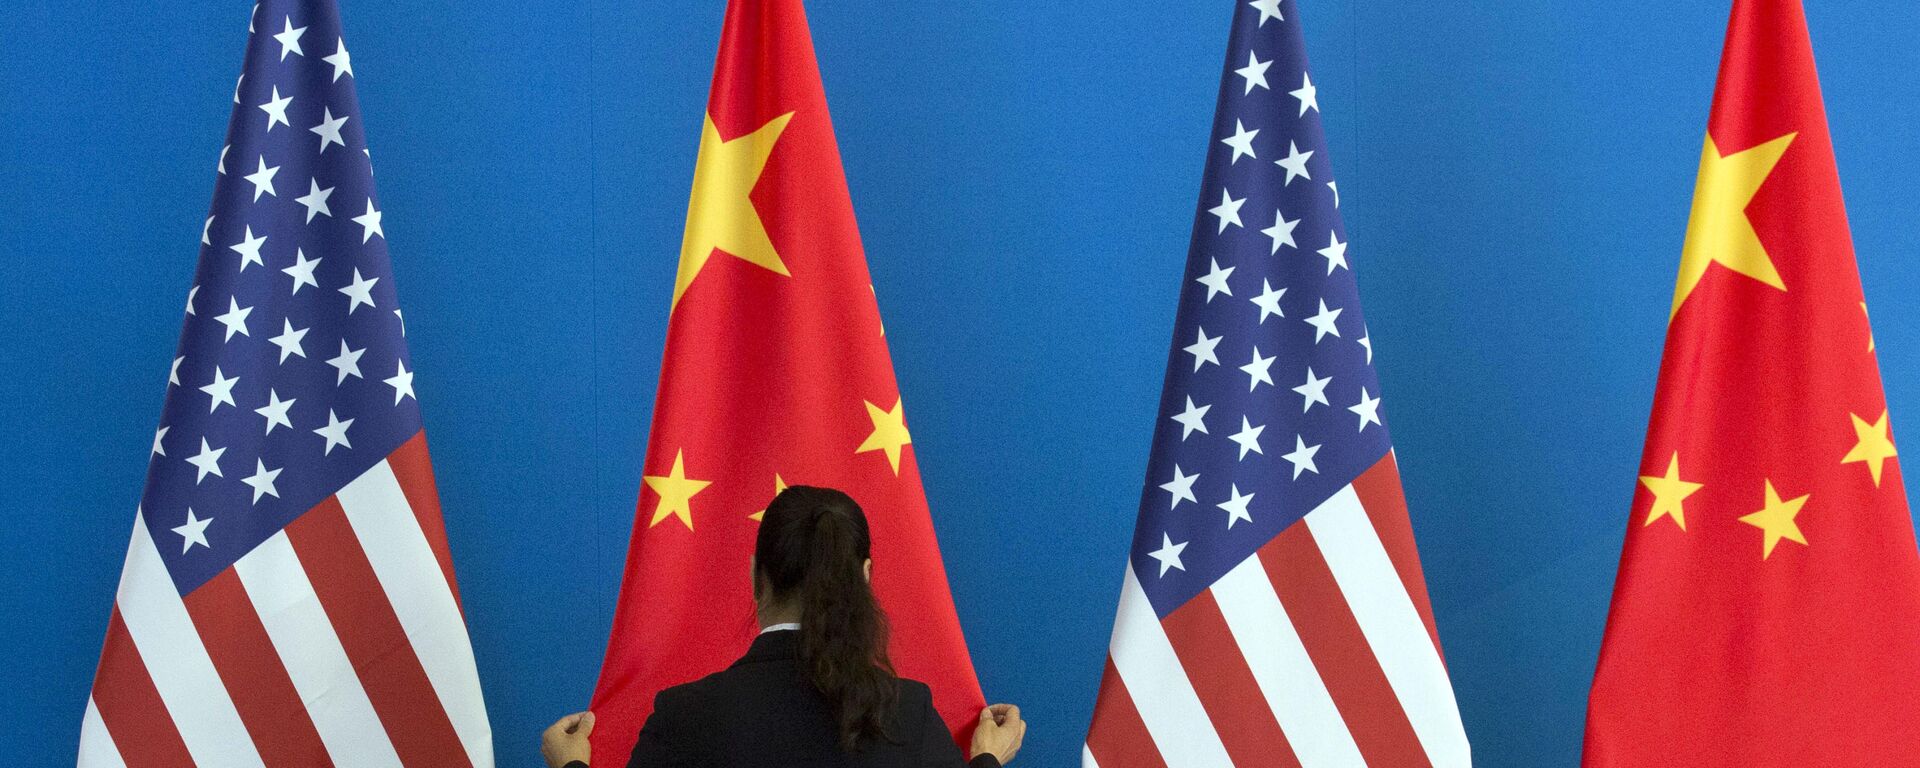 A Chinese woman adjusts the Chinese national flag near U.S. national flags before a Strategic Dialogue expanded meeting that's part of the U.S.-China Strategic and Economic Dialogue at the Diaoyutai State Guesthouse in Beijing, Thursday, July 10, 2014 - Sputnik International, 1920, 01.08.2022